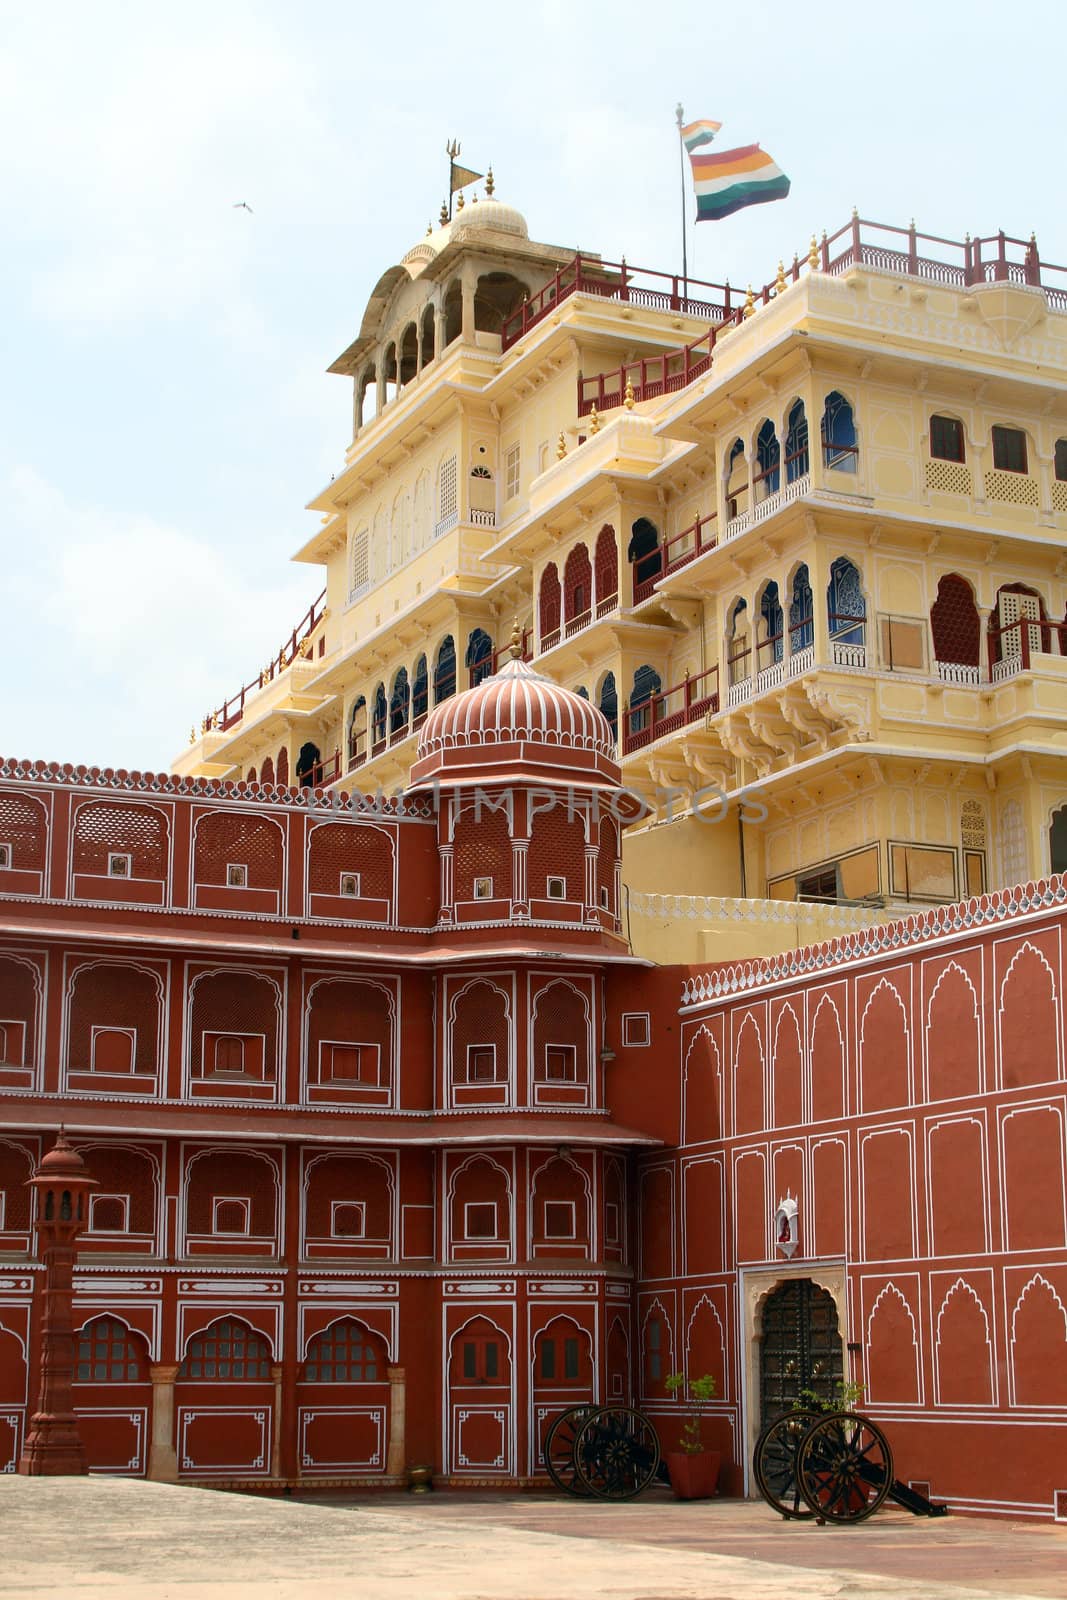 The city palace located in jaipur india